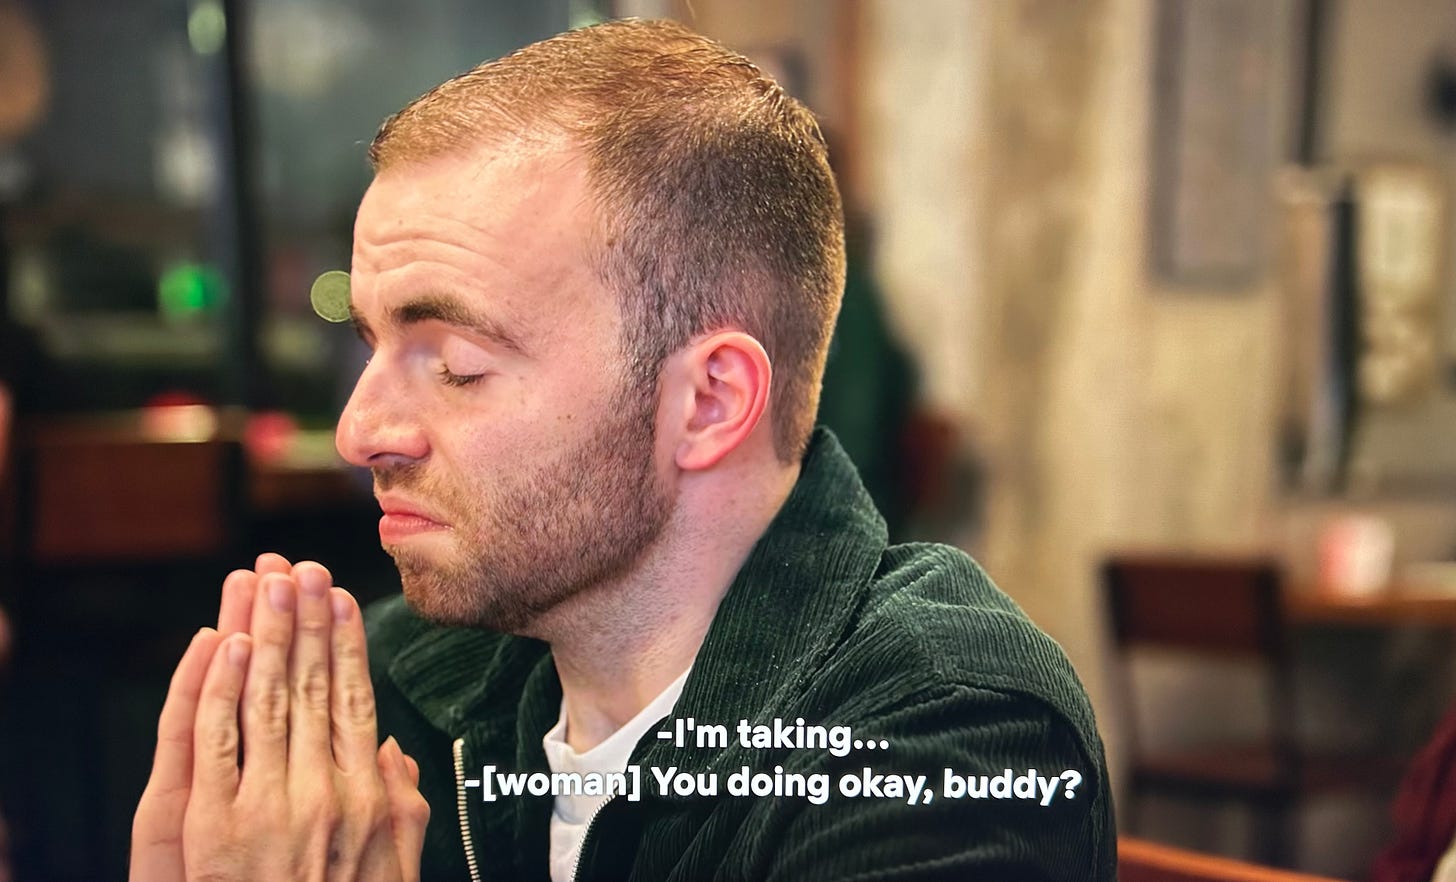 A screenshot of Connor at the speed dating event, with captions asking if he's doing okay and calling him buddy.